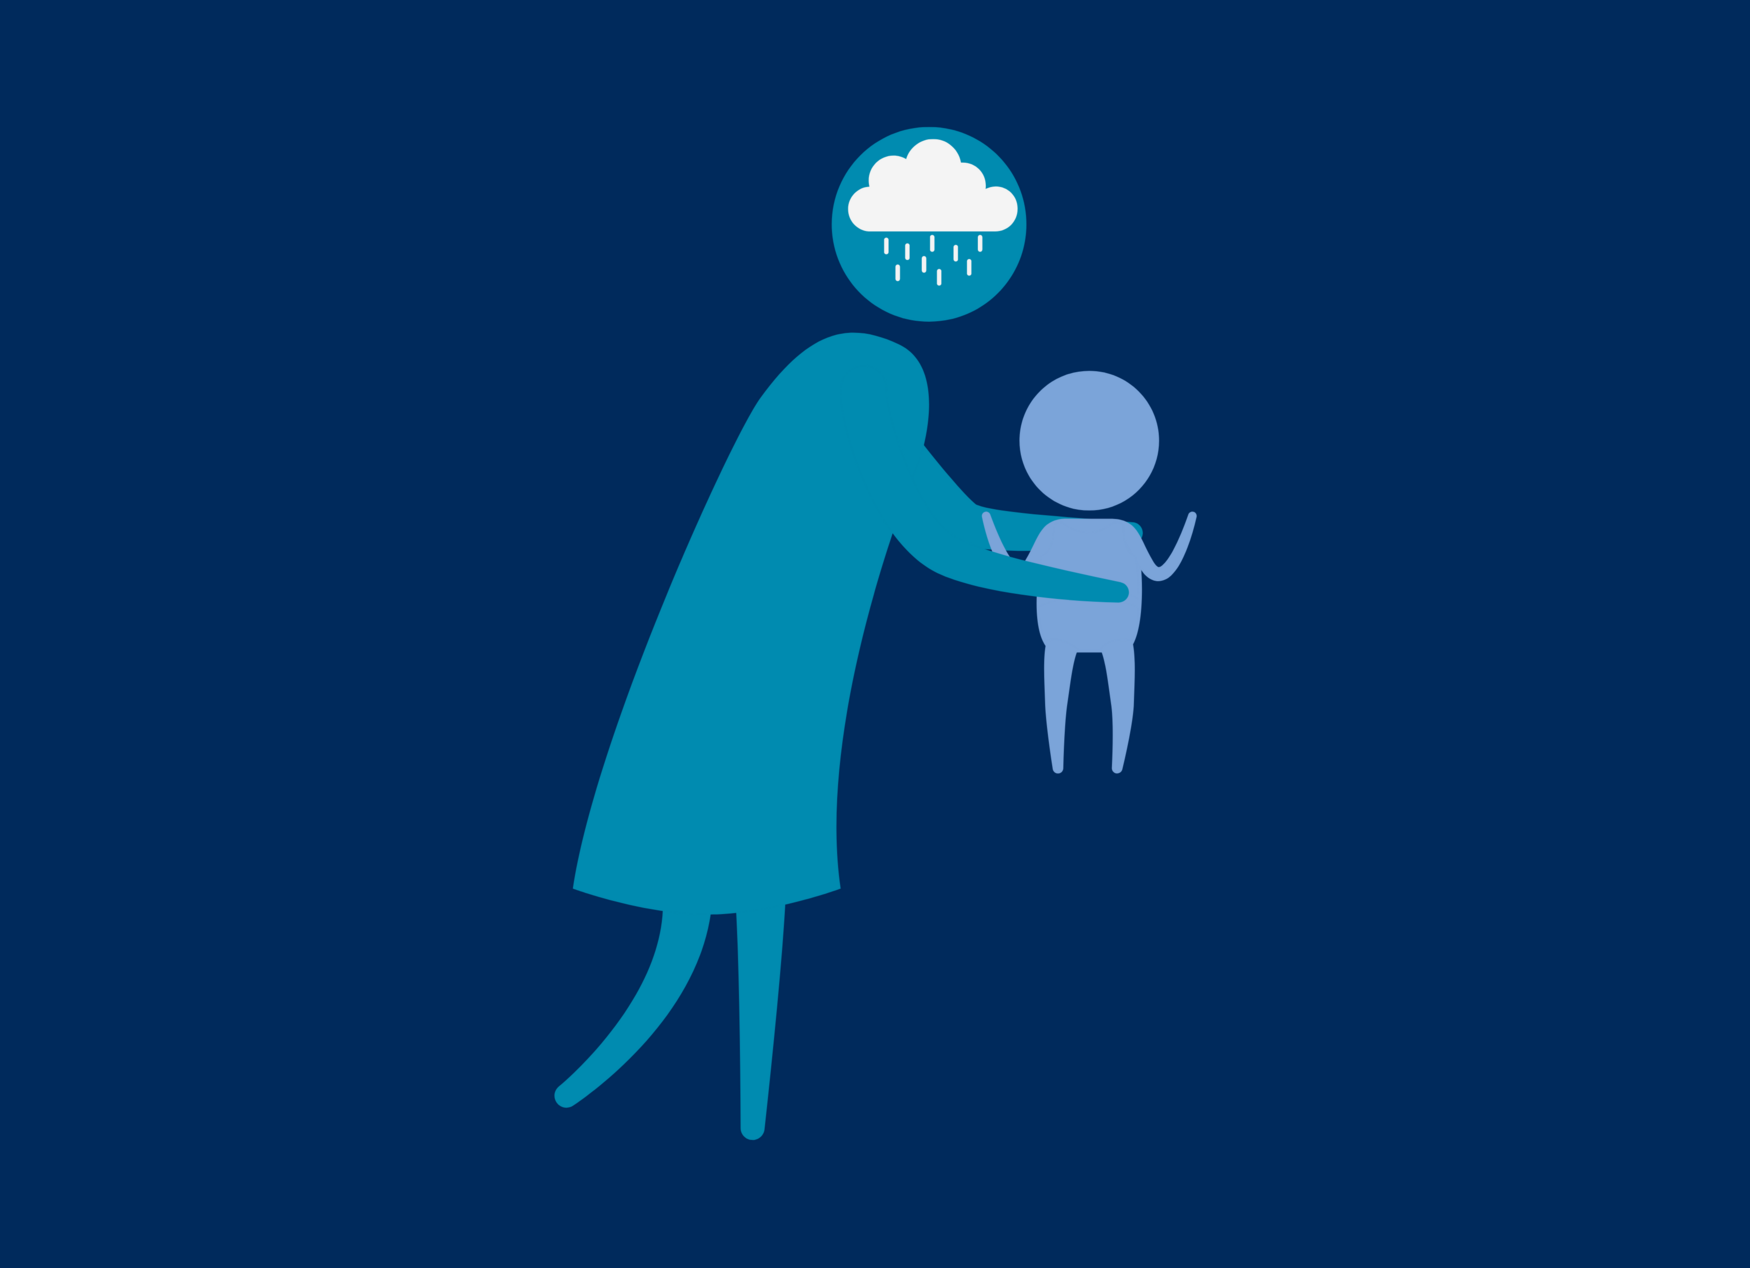 An icon showing a woman holding an infant with a rain cloud symbol in her head